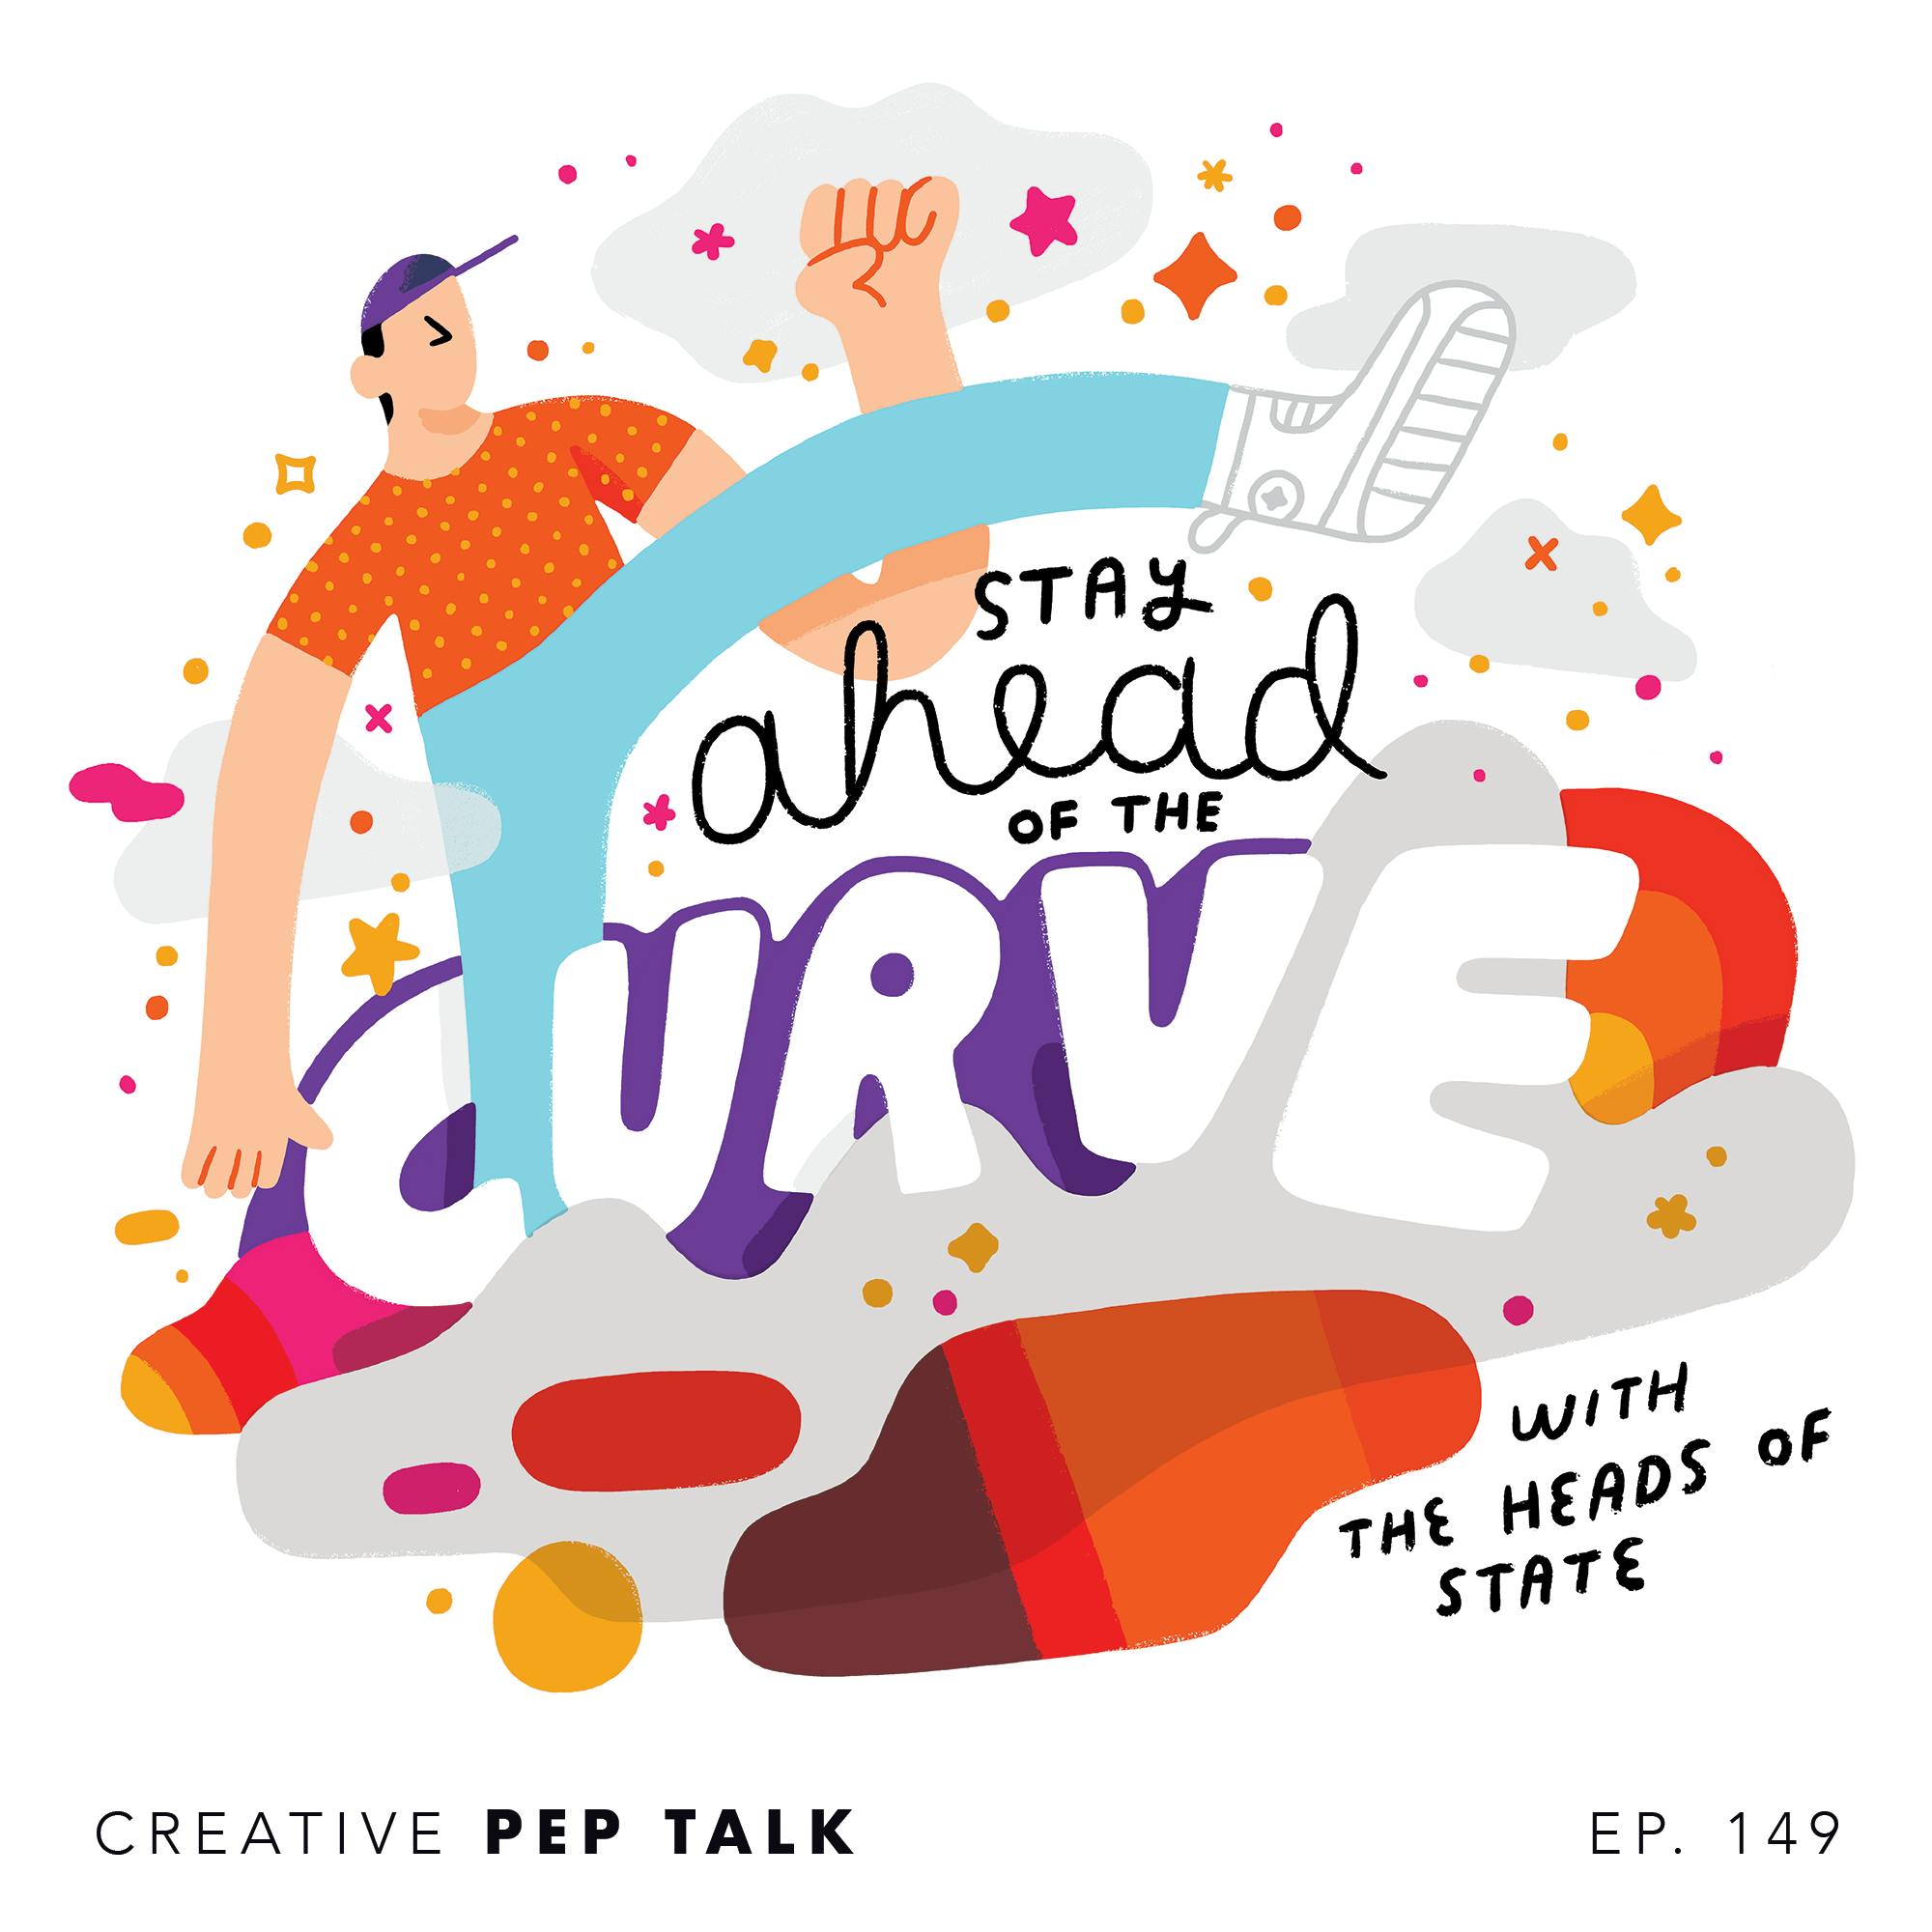 149 - Stay Ahead of the Curve with The Heads of State